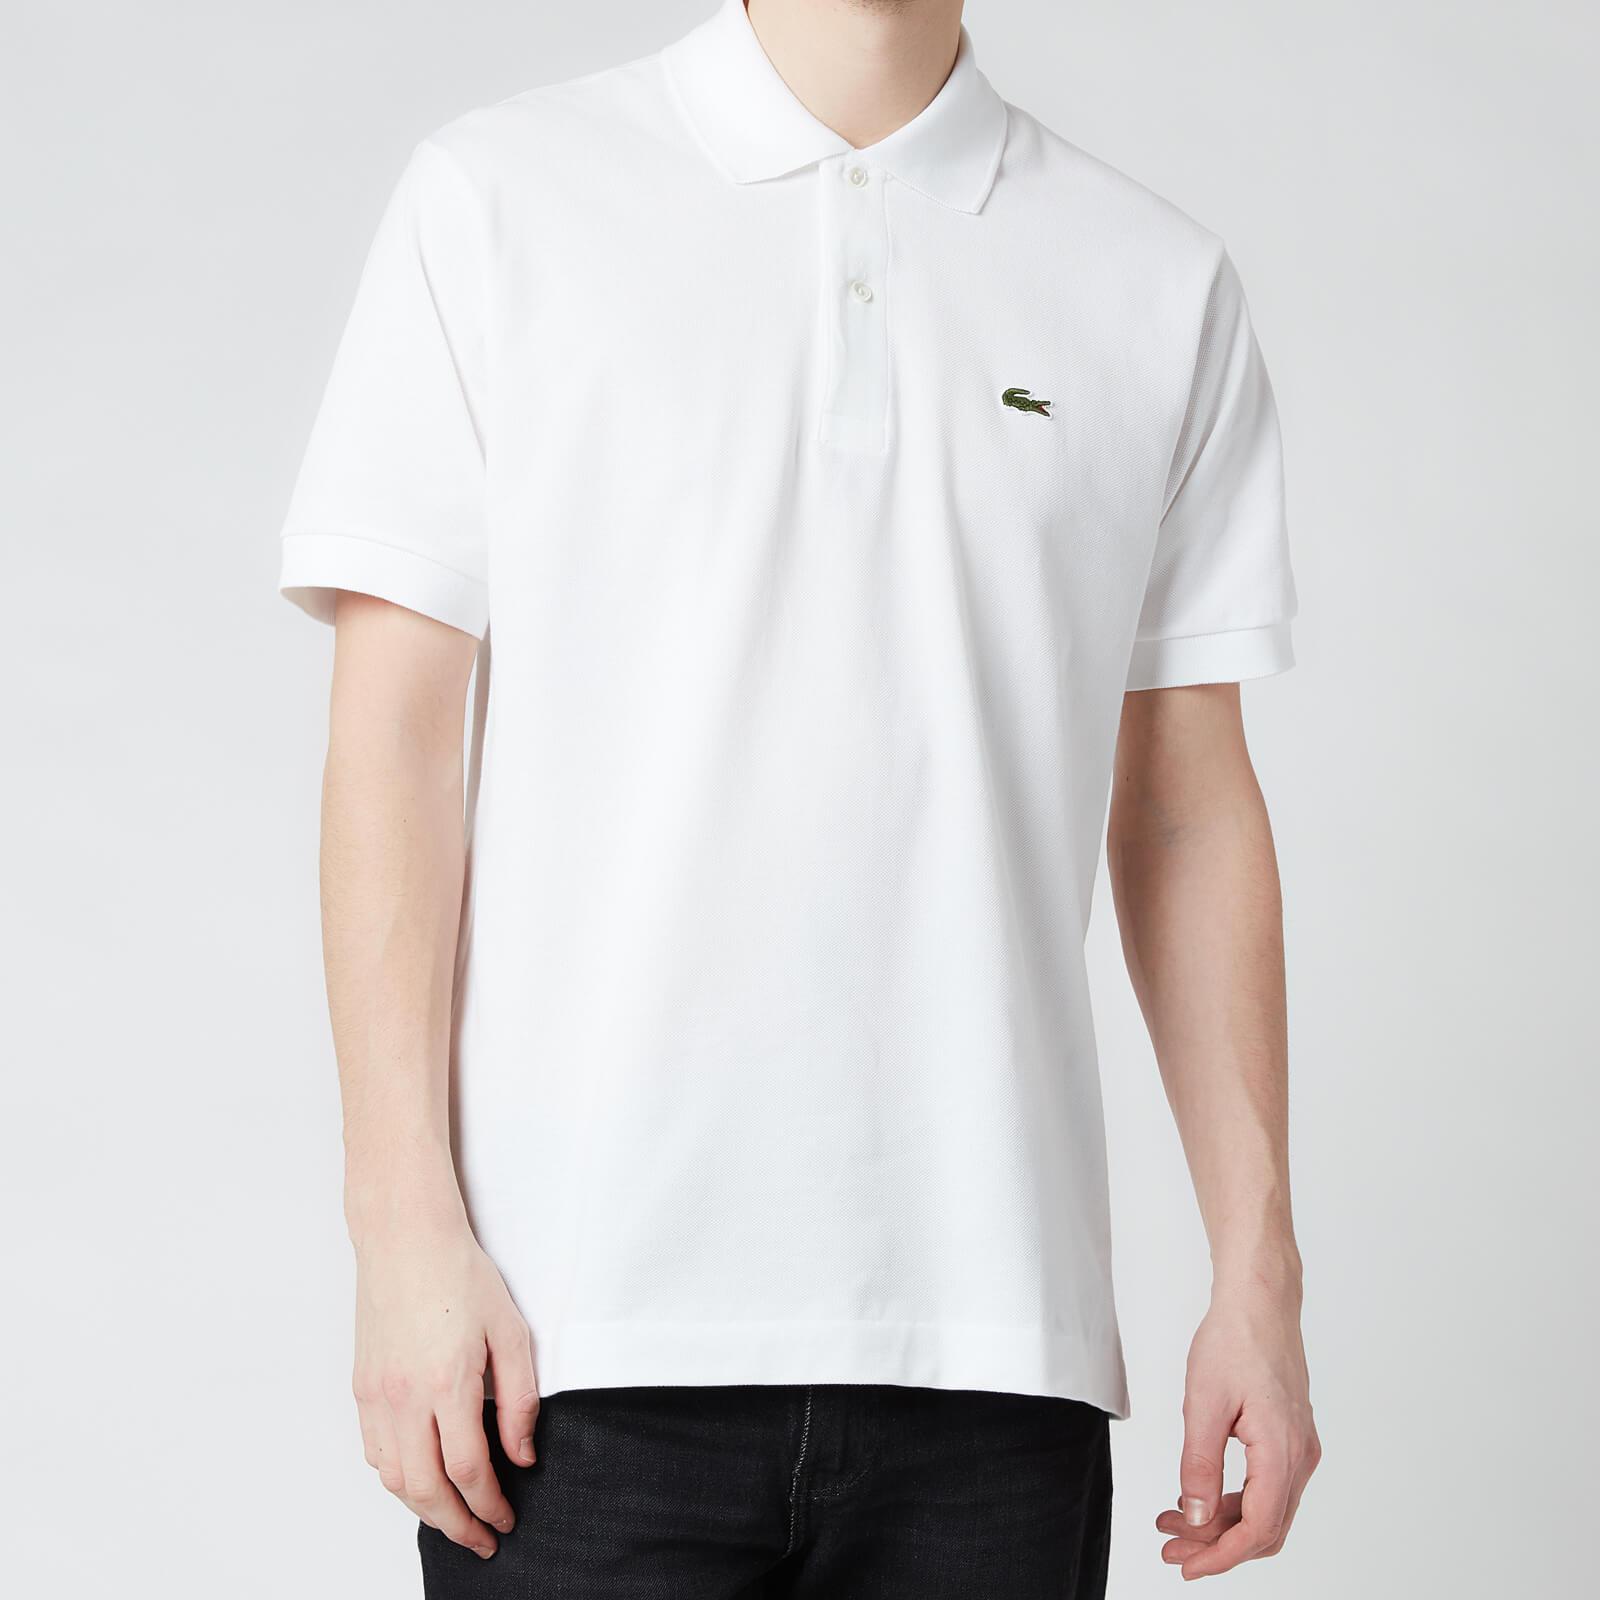 lacoste classic fit shirt